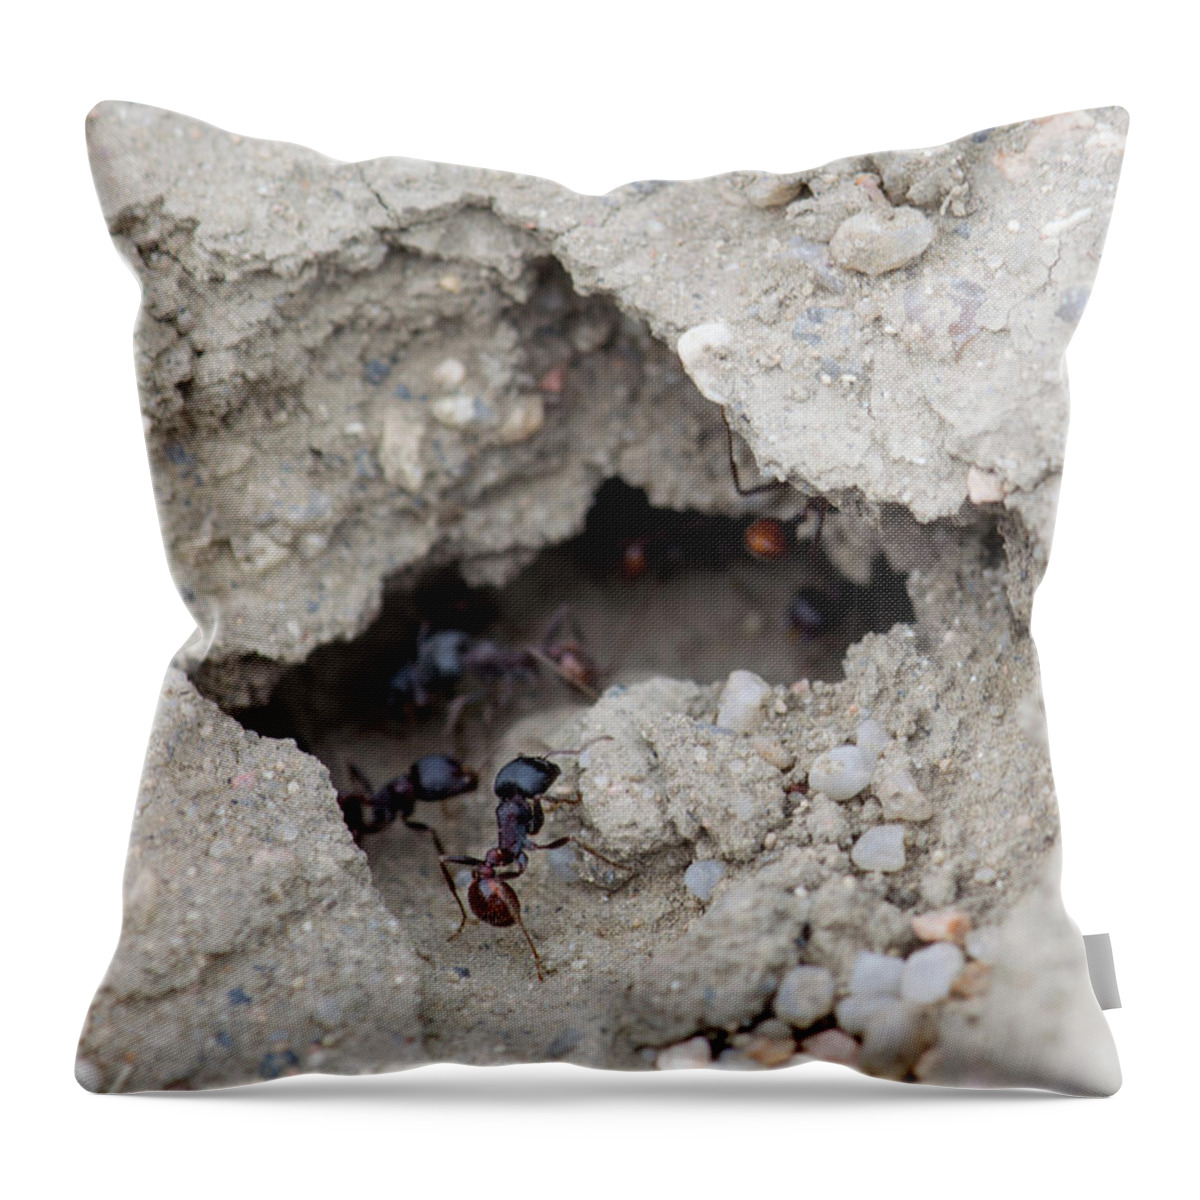 Photo Throw Pillow featuring the photograph Ants by William Pullaro Jr